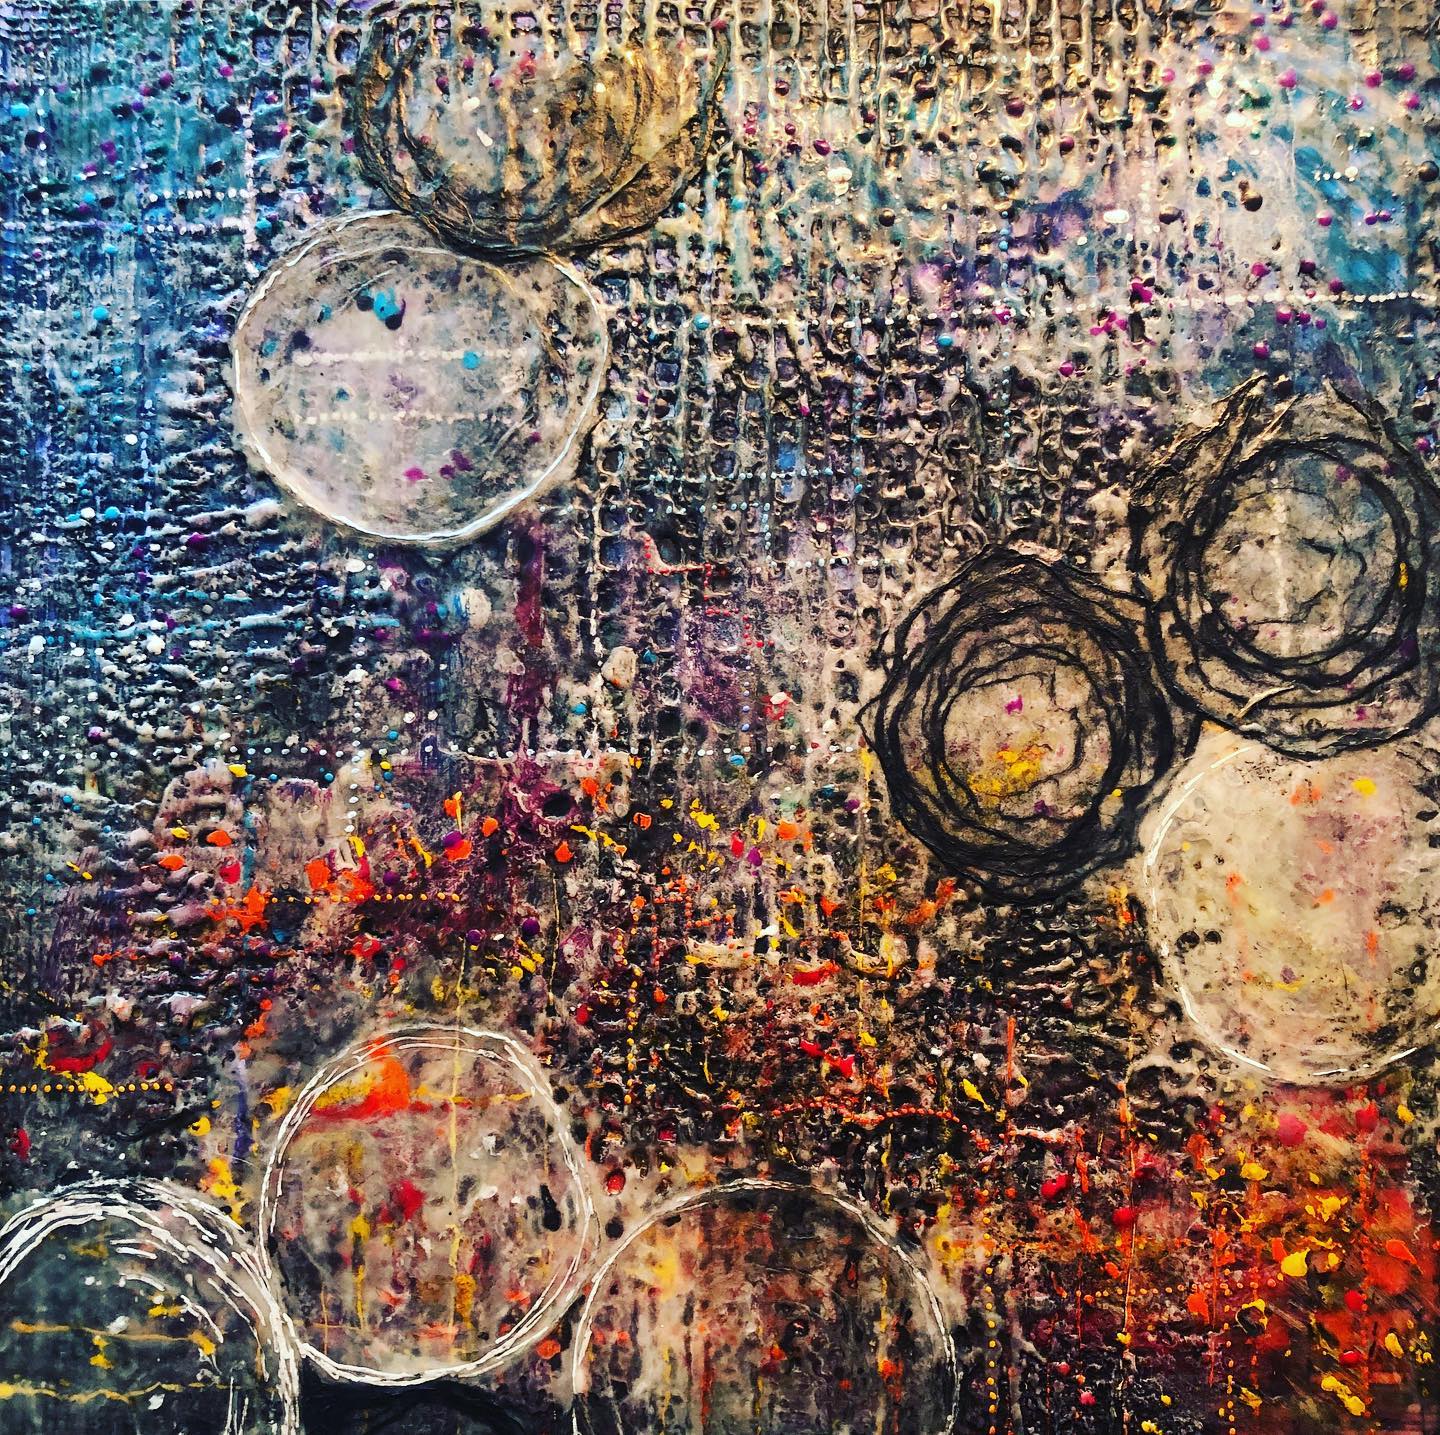 Encaustic Mixed Media Painting by Mike Giannella in New Jersey